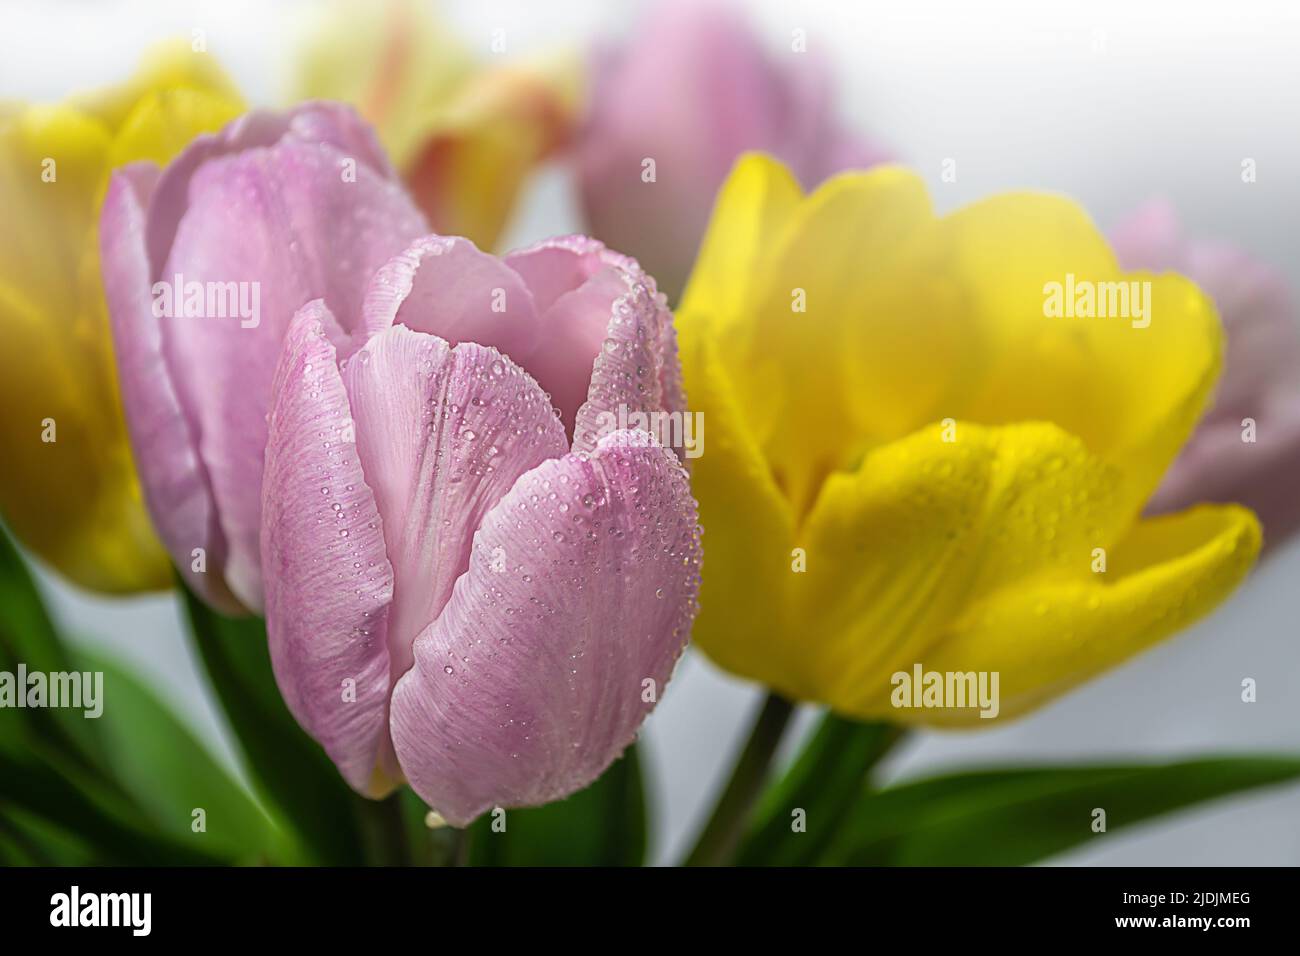 bouquet of tulips on a on a colored blurred background close up Stock Photo